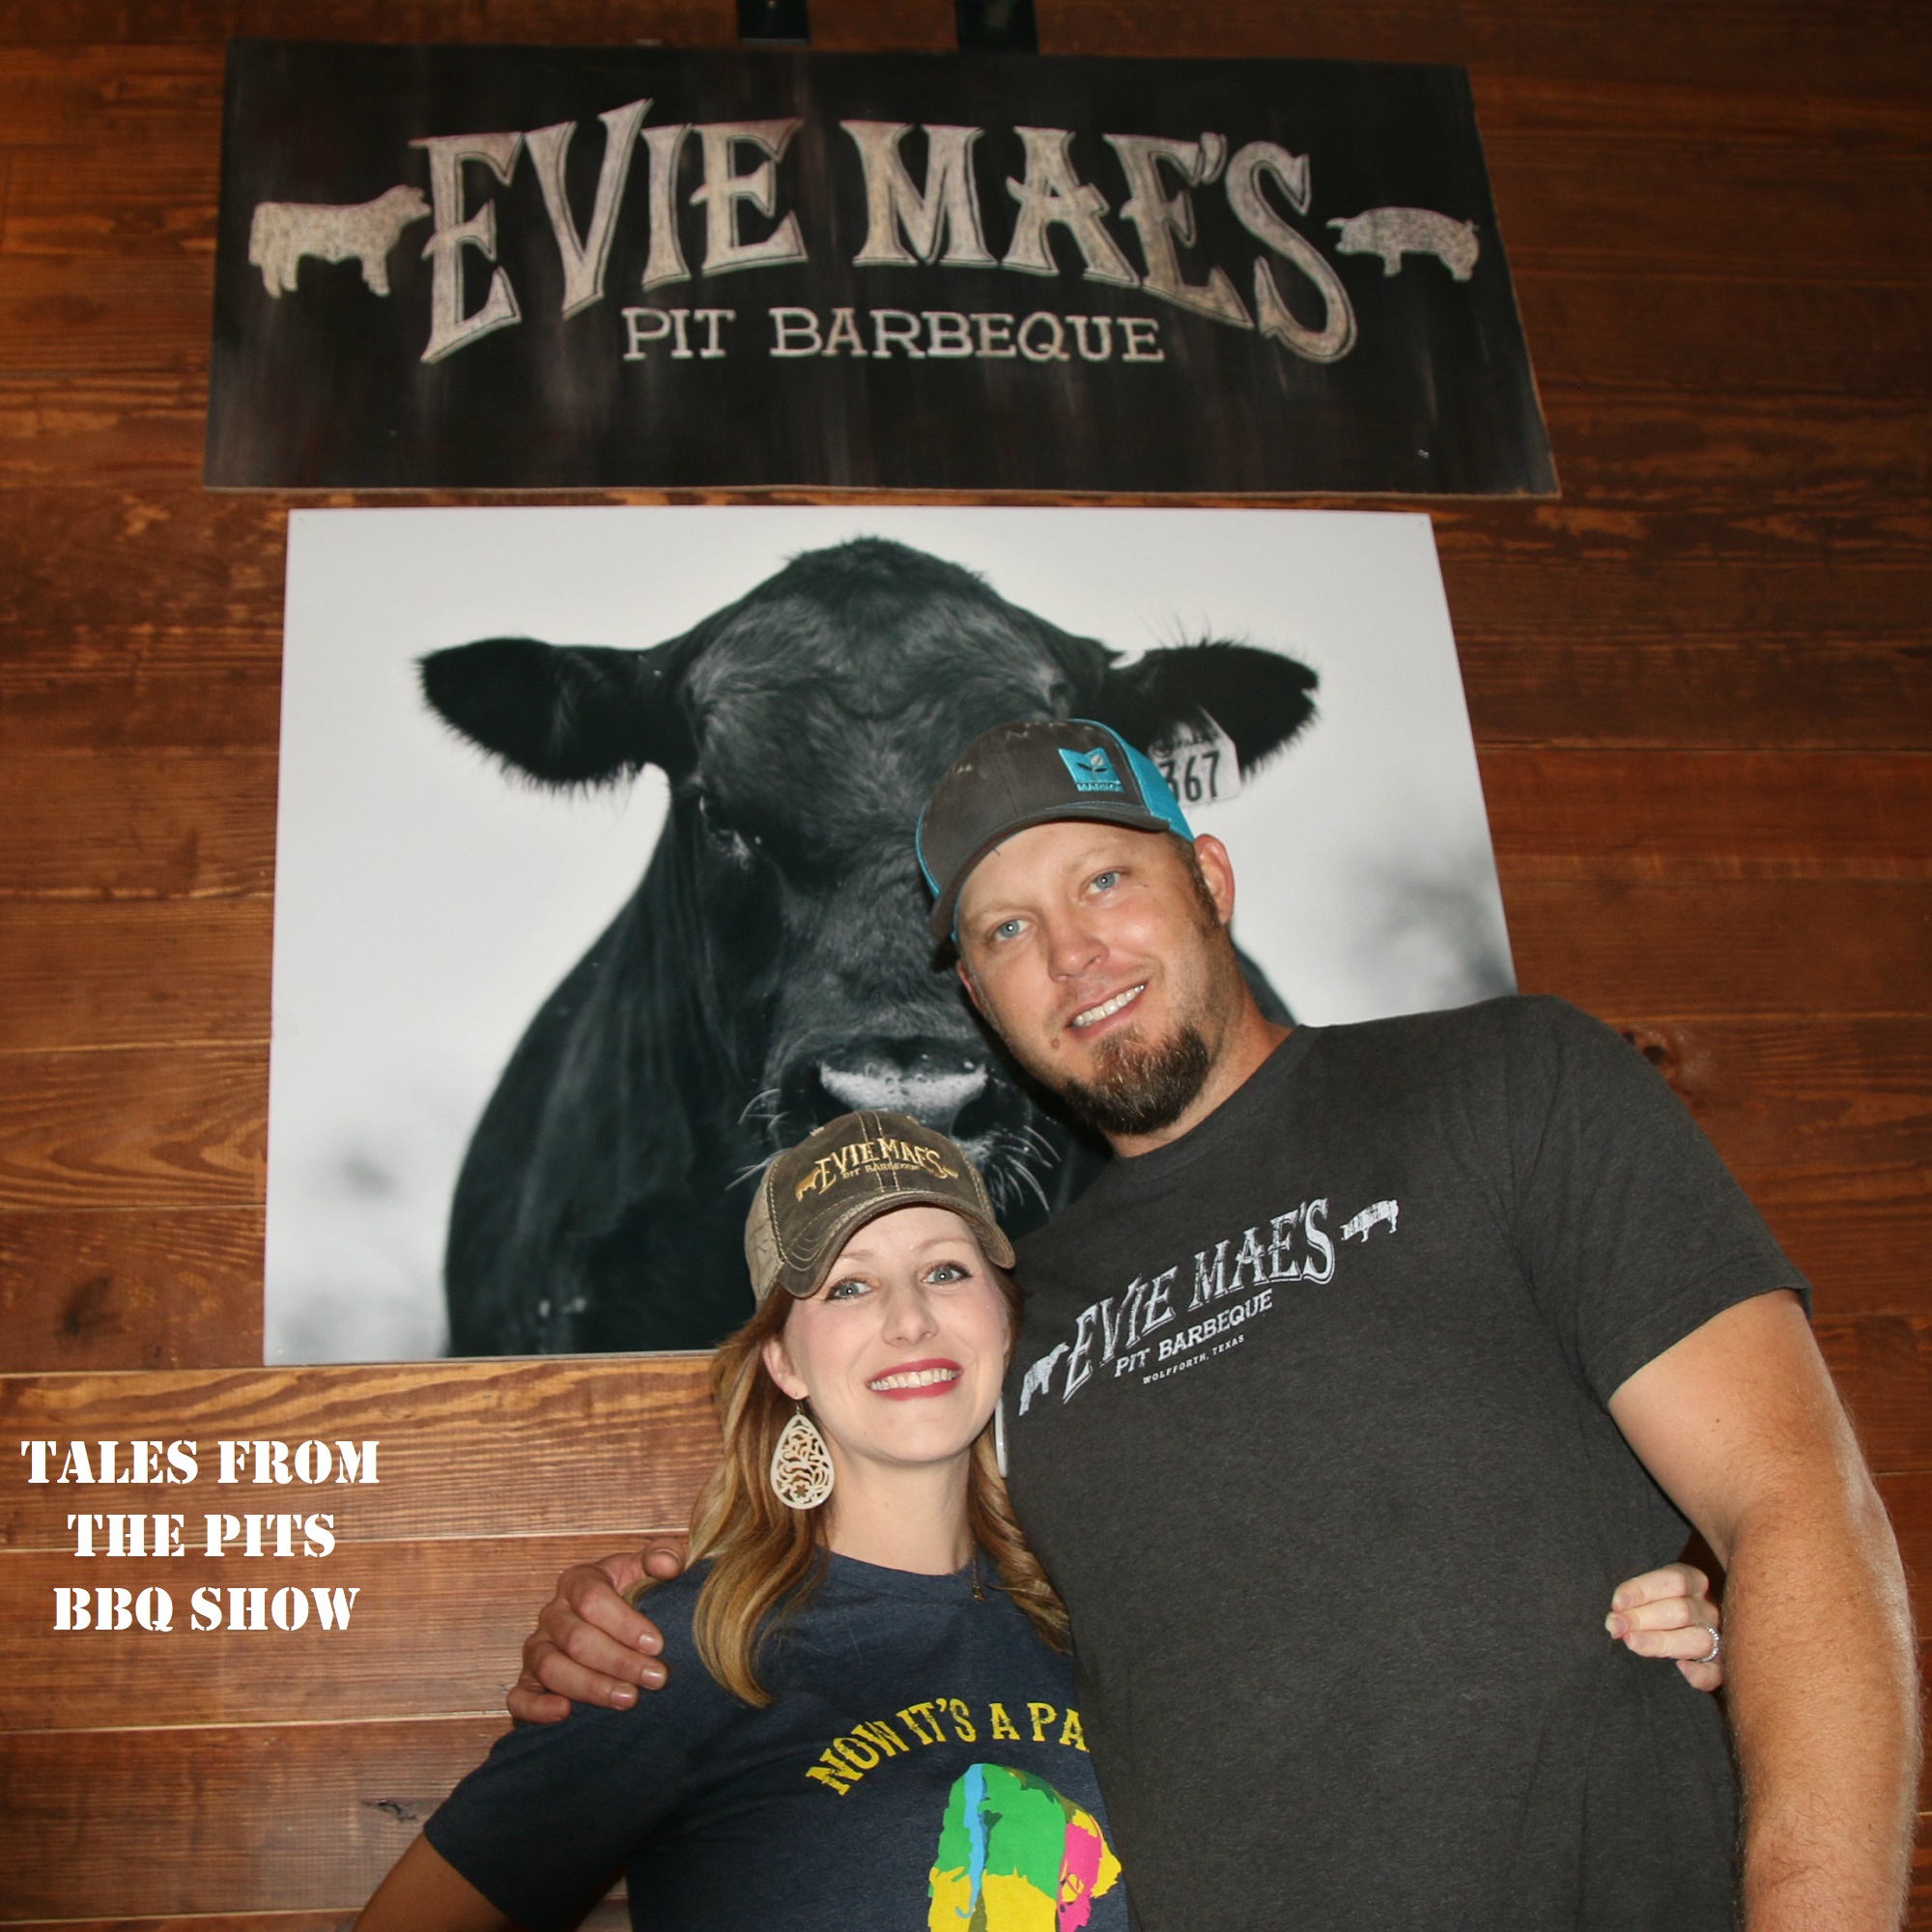 TFP Ep. 18 Evie Mae’s Pit Barbecue - Arnis Robbins Interview part 1